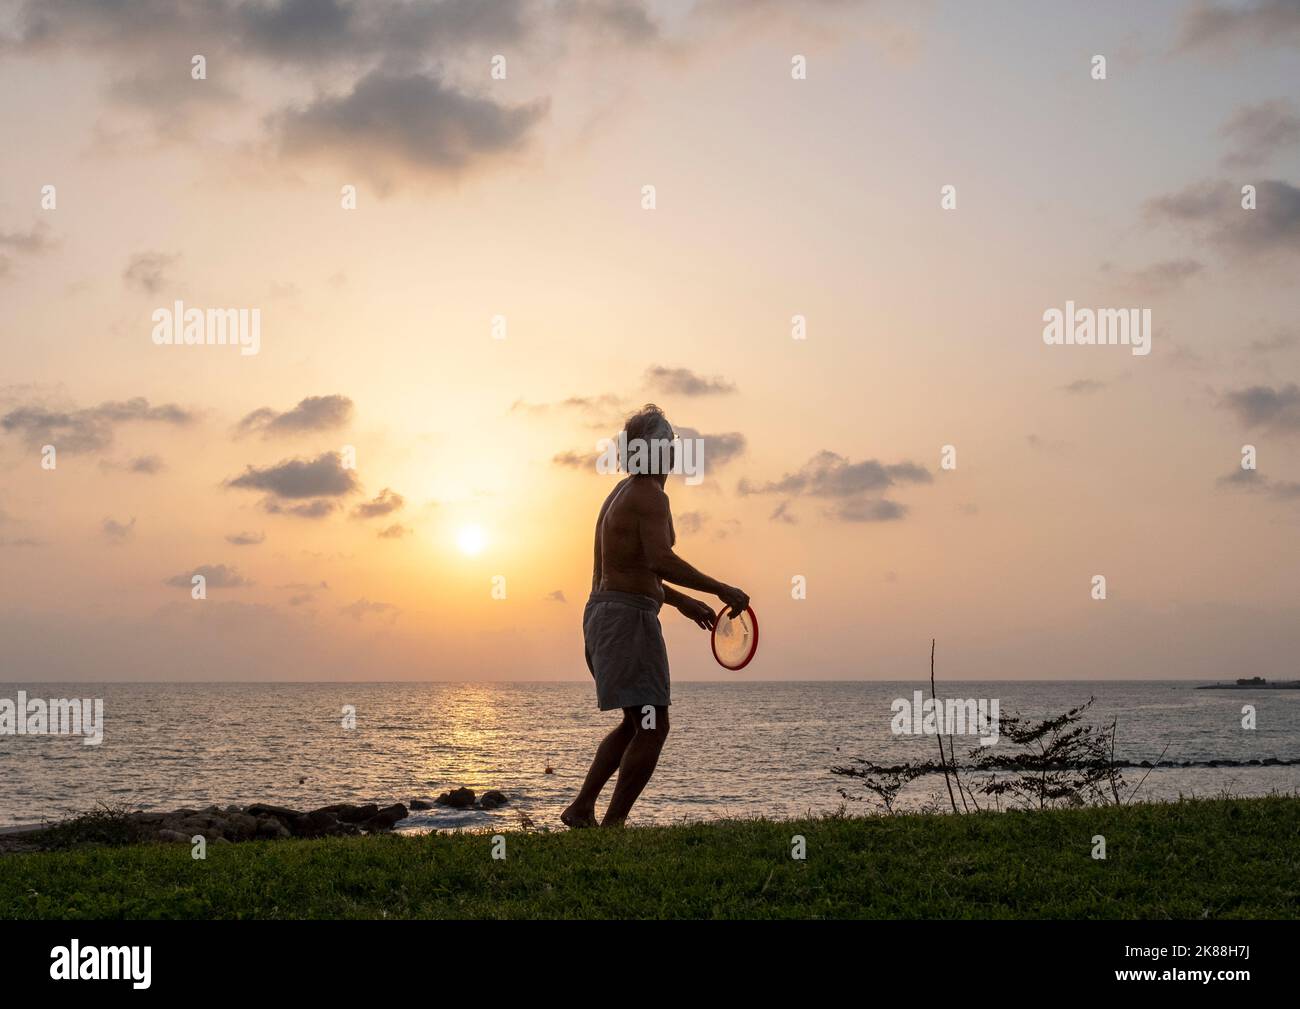 A man exercising on a beach throwing a frisbee, Paphos, Cyprus. Stock Photo